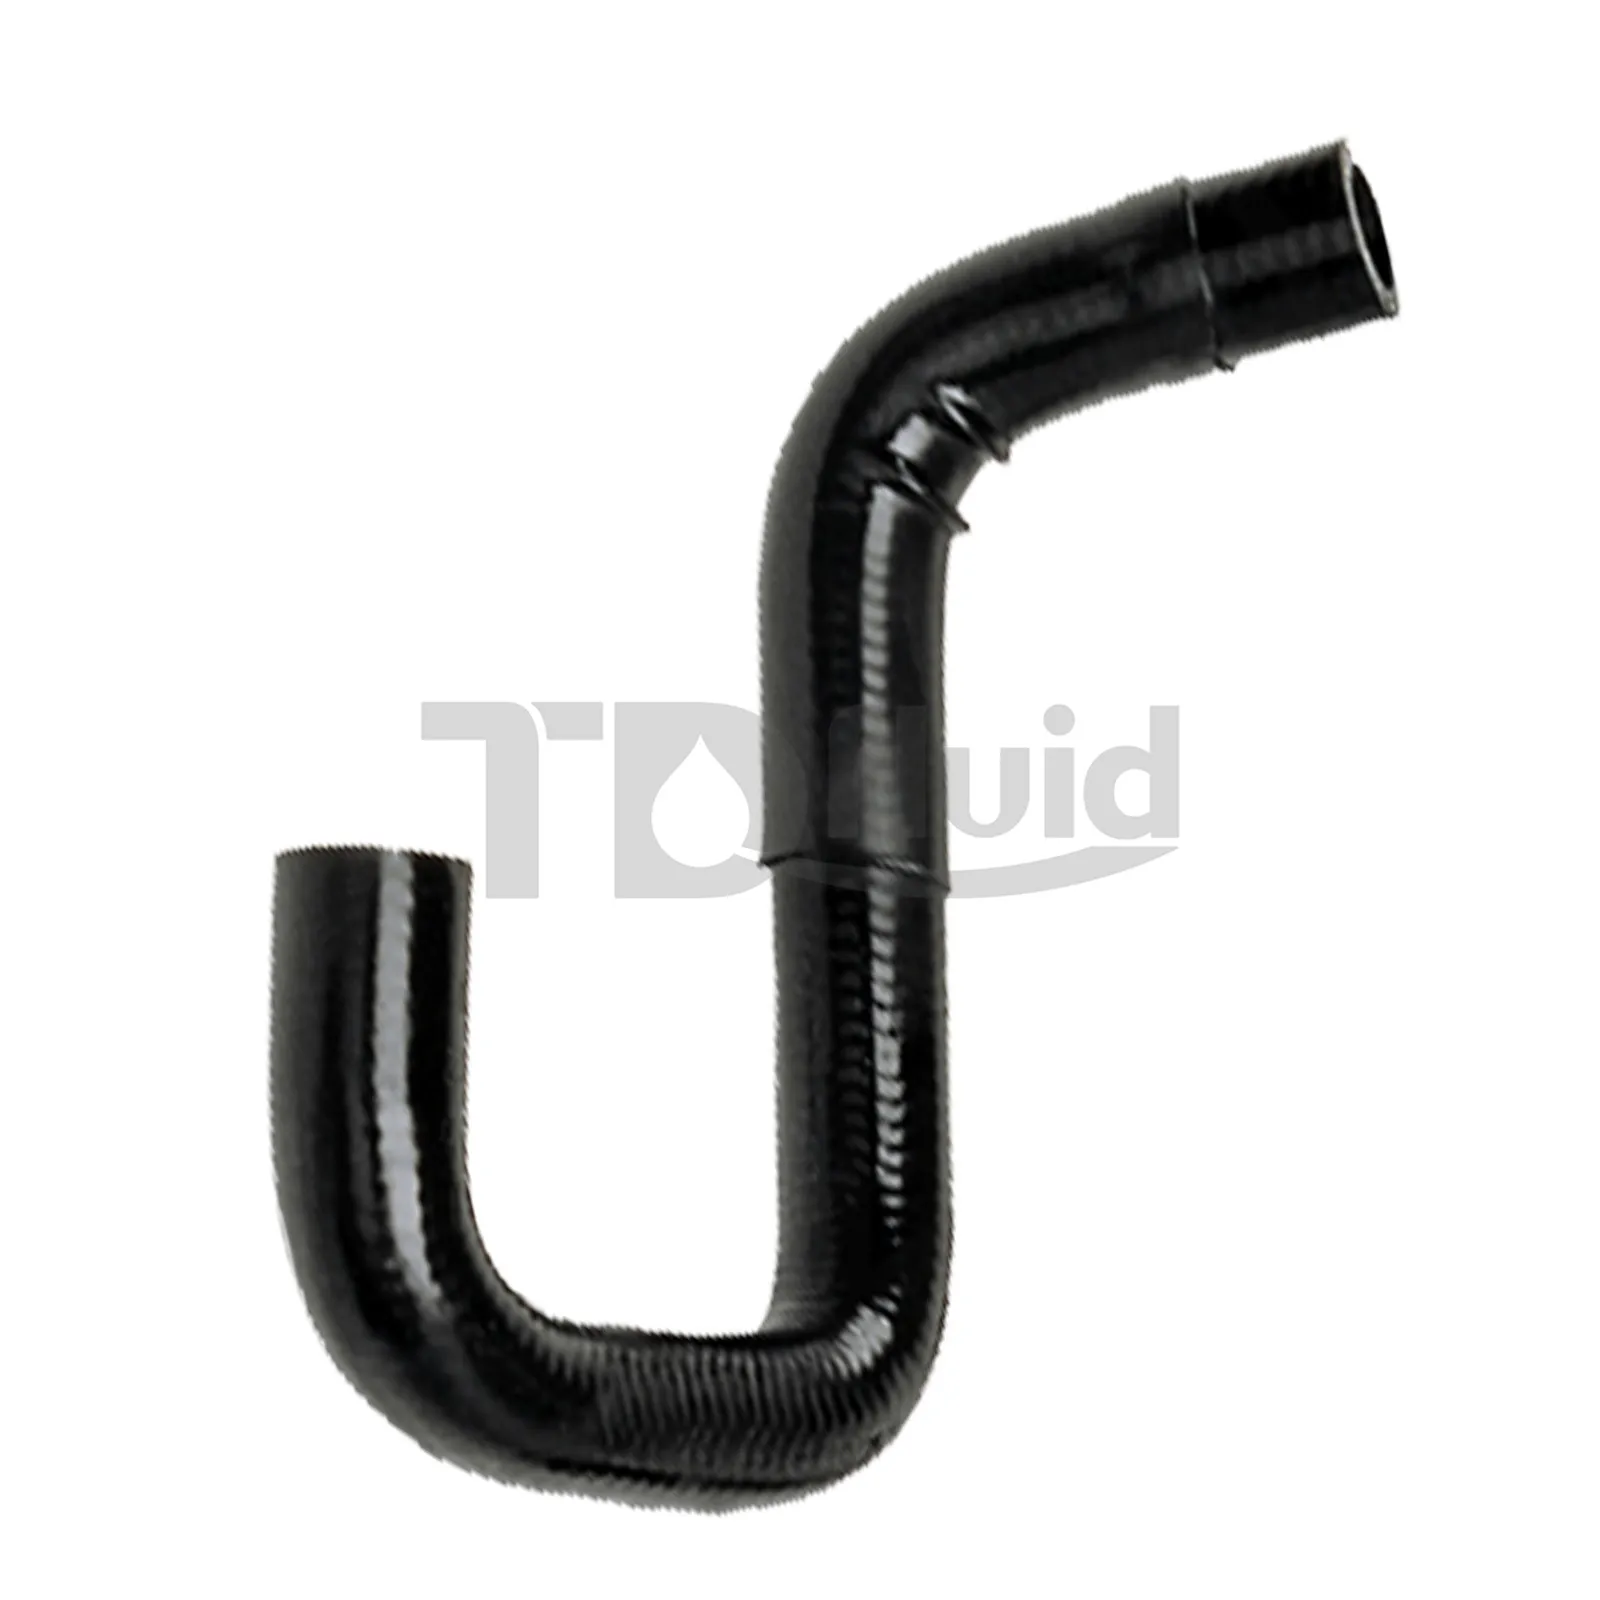 Ford Transit Connect 1.8 2002 2013 Fits Oil Cooler Radiator Top Hose 1S4Q8B451AB